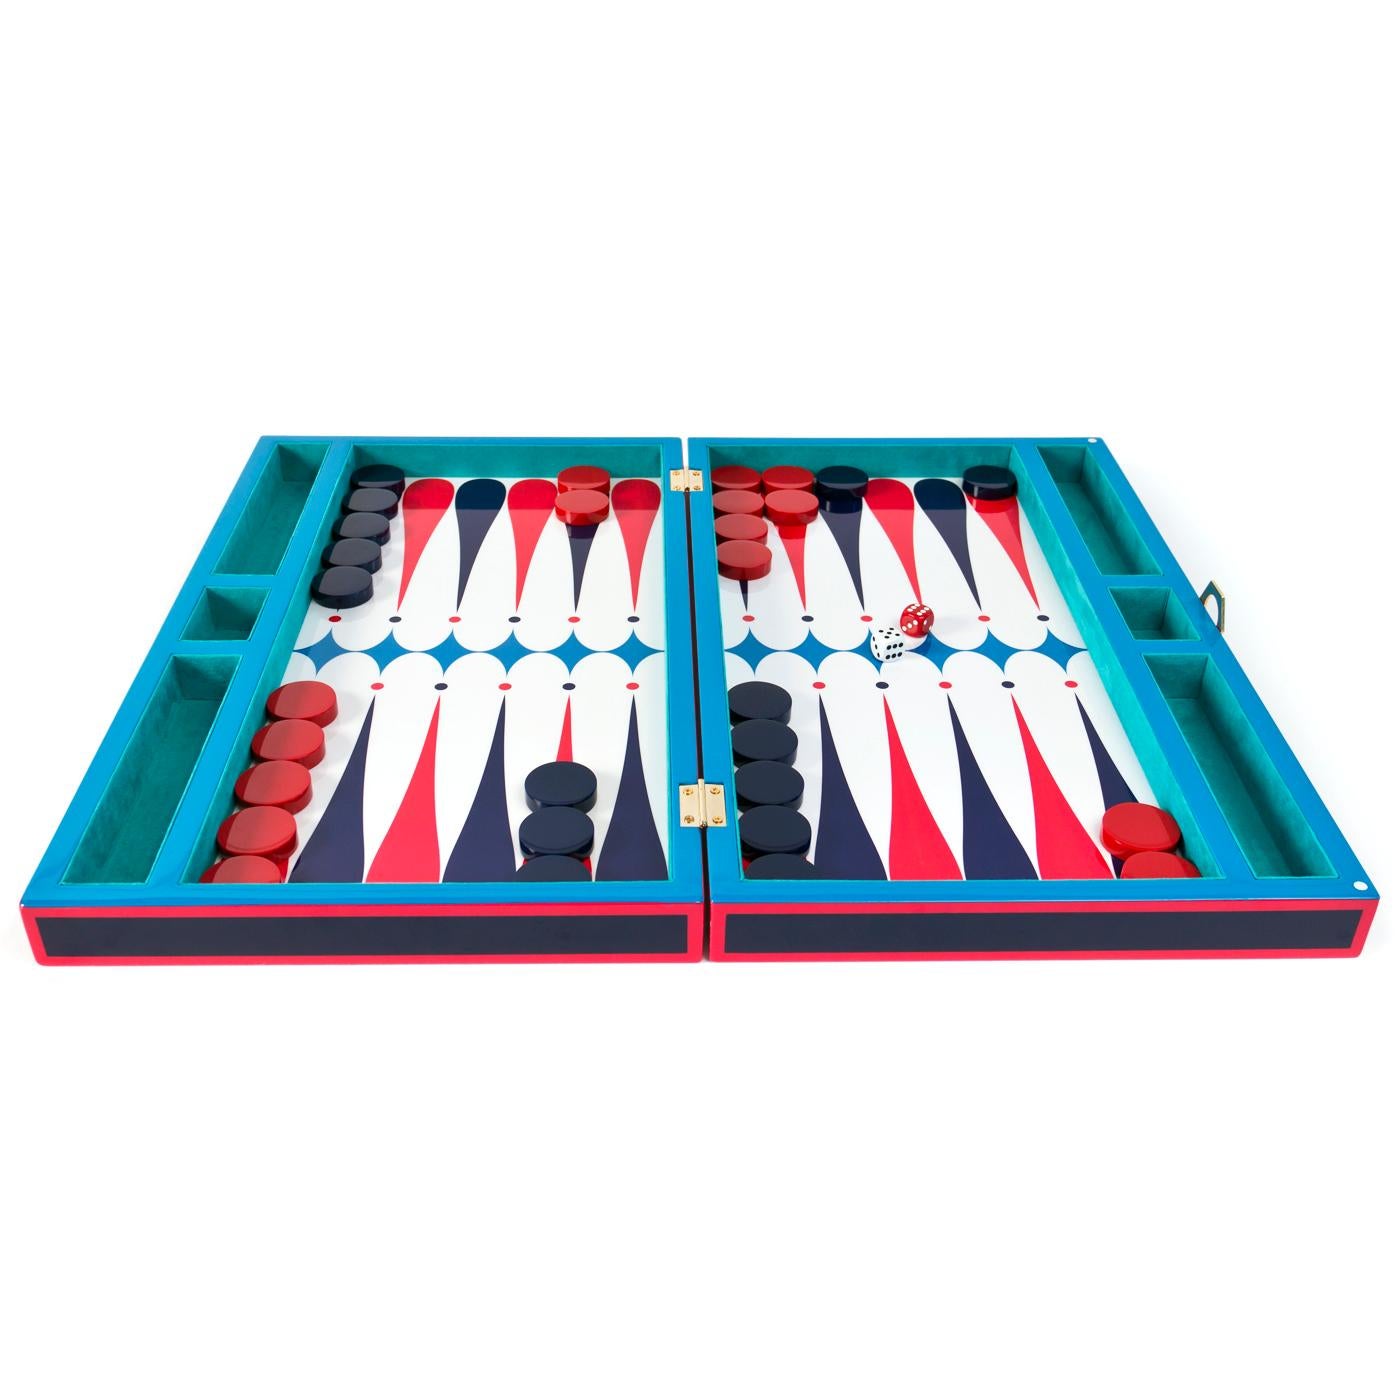 Raise your game. Our lacquer backgammon set is a fabulous combination of function and groovy design. You'd be mad to hide this bright and shiny sizzler, but if you want to it folds into a chic lacquer box. Looks great closed or open and it's sure to